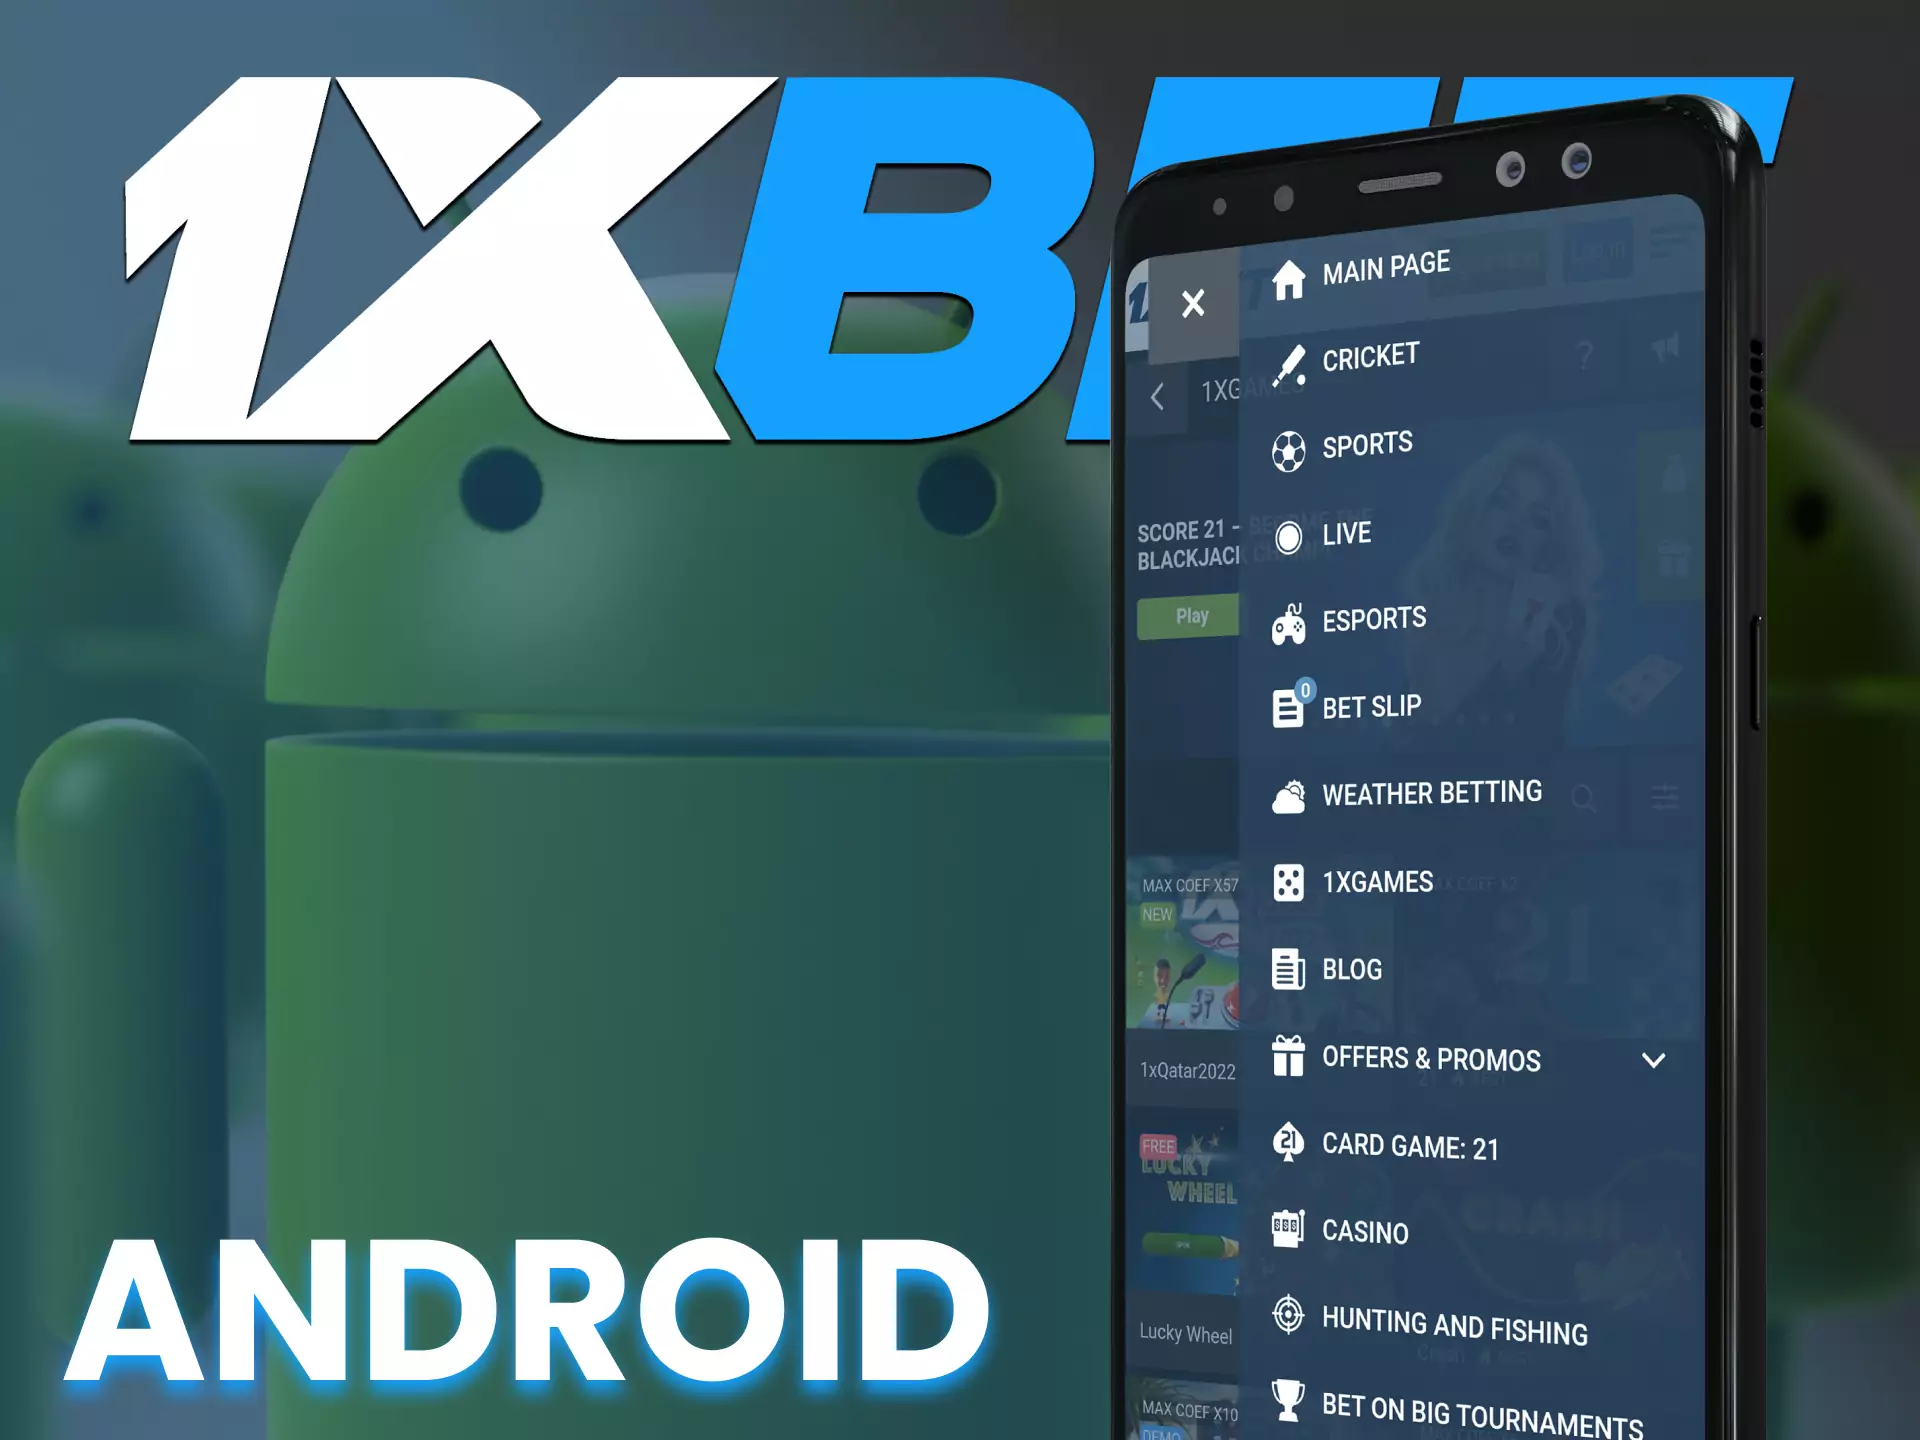 With 1XBET you can place bets directly from your Android device through the special app.